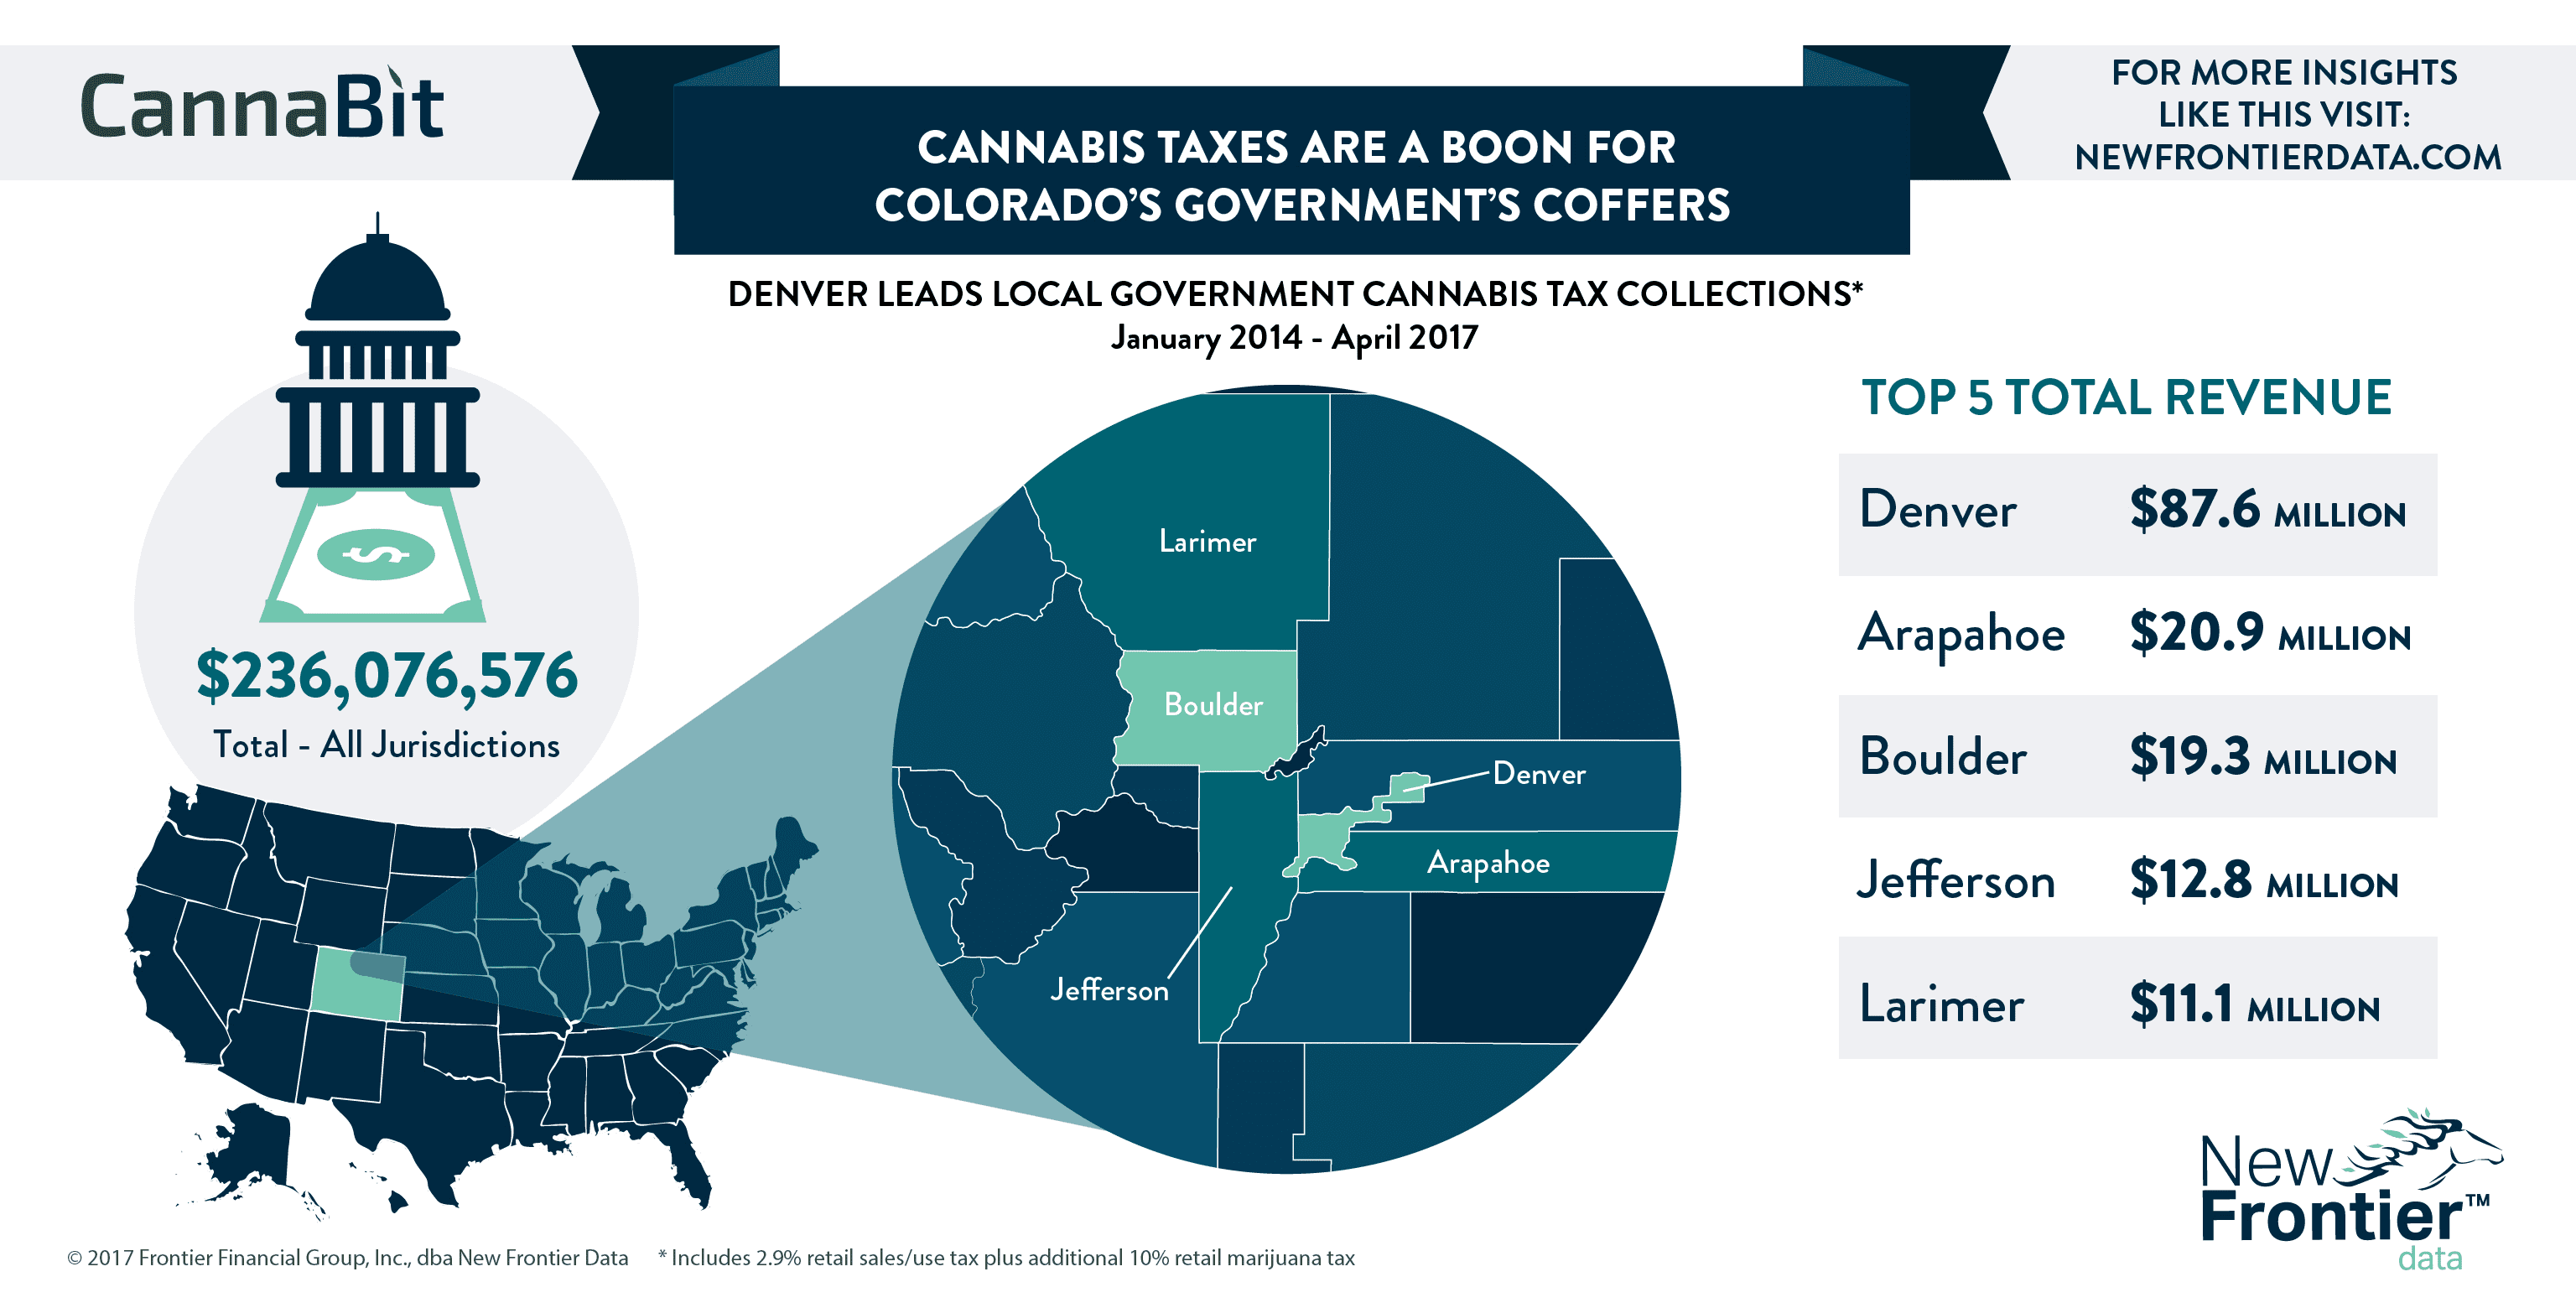 Cannabit: Cannabis Taxes Are A Boon for Colorado's Government's Coffers / 07162017